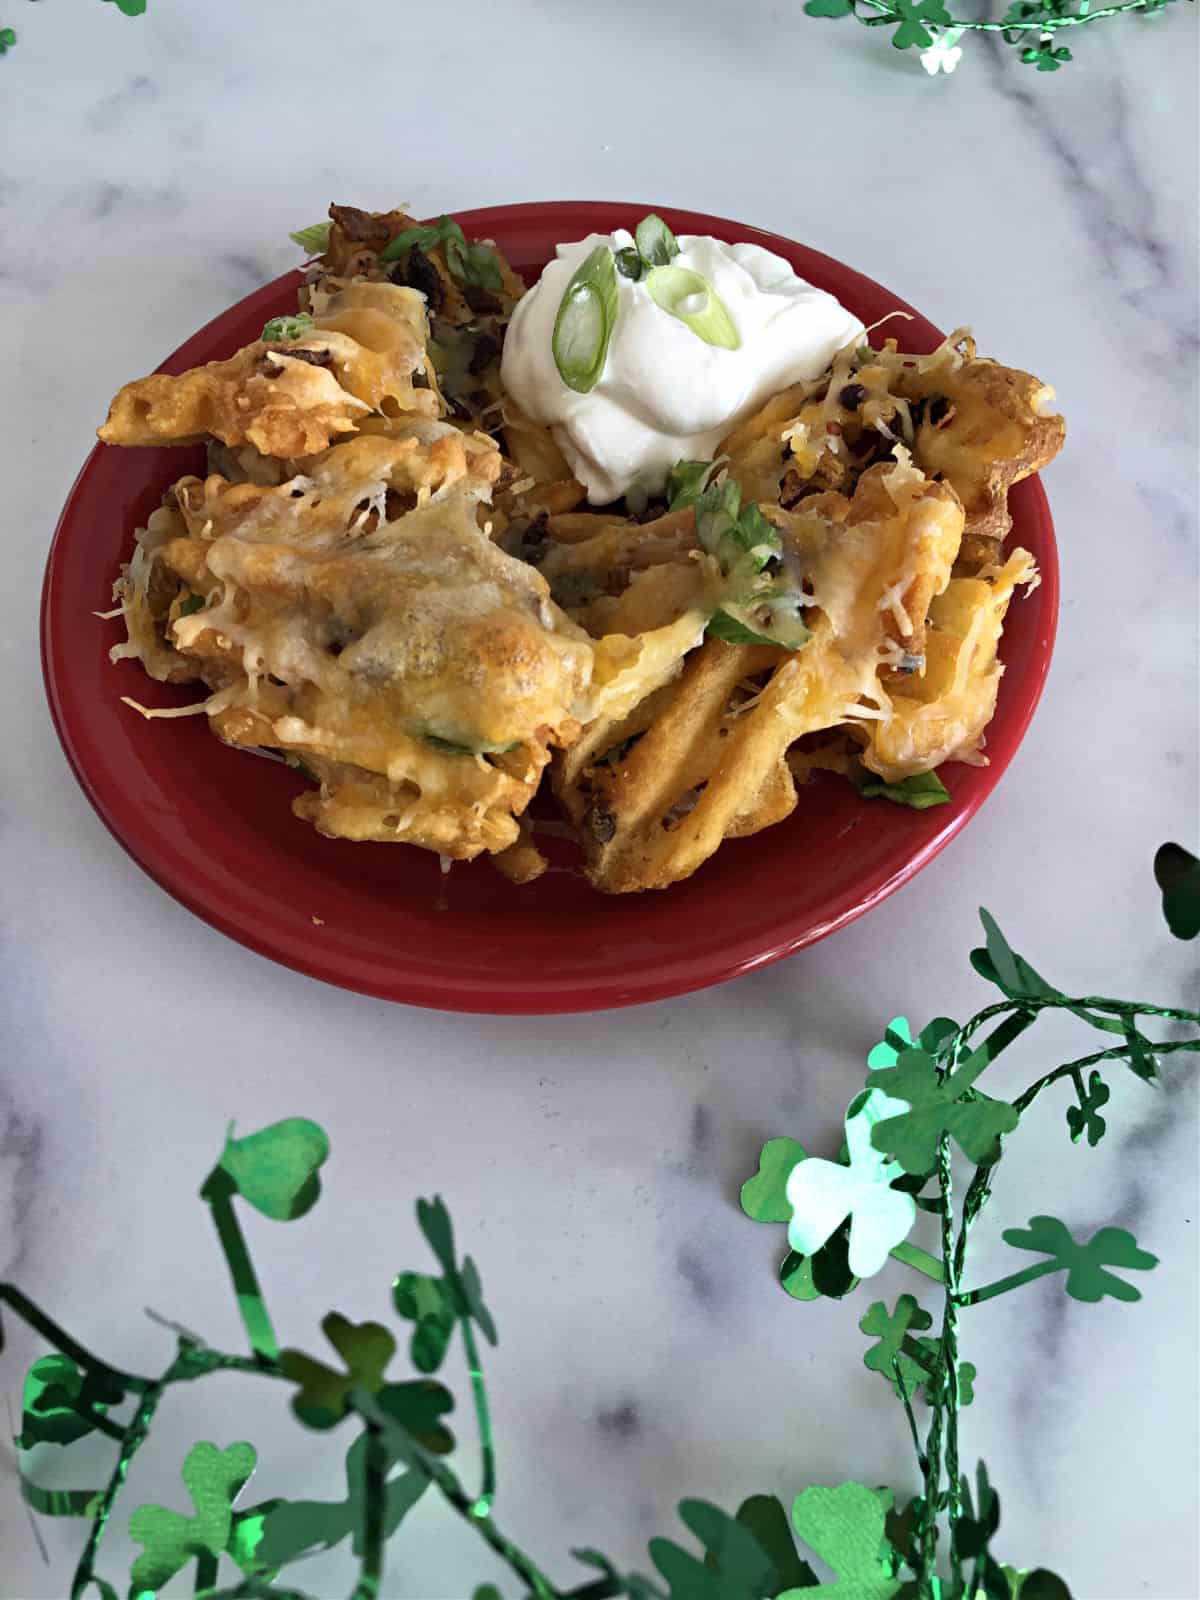 Plate of Irish Nachos with sour cream, ready to eat.